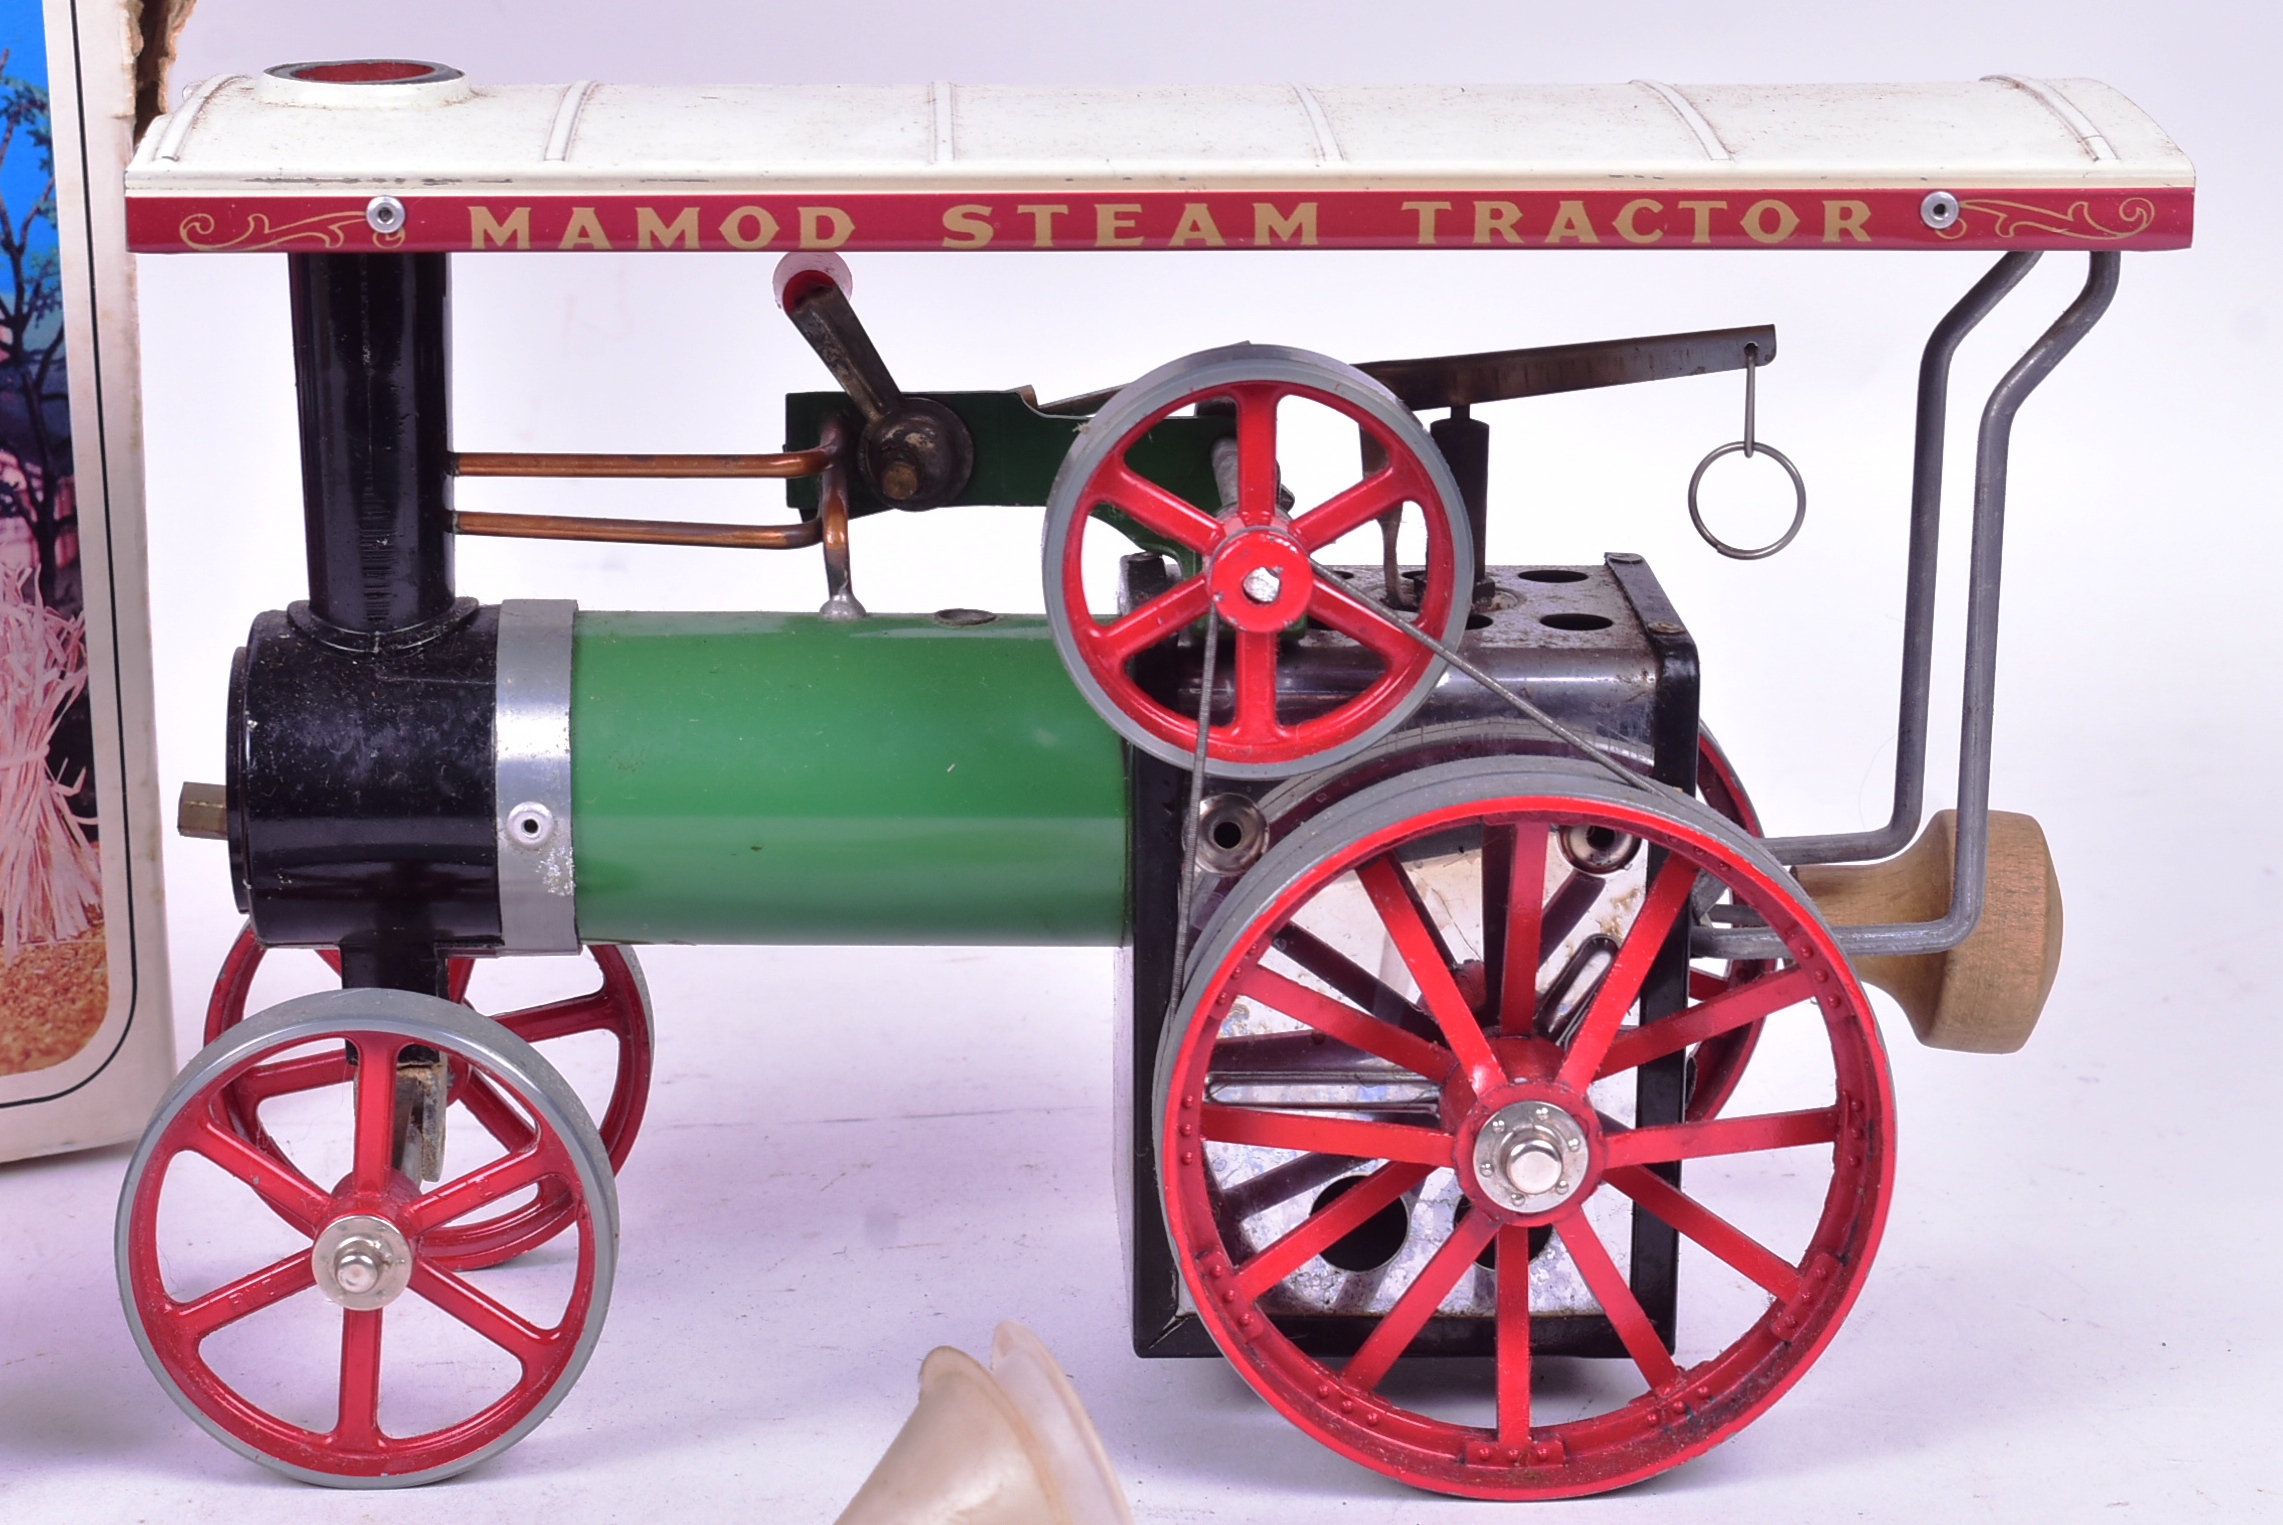 MAMOD STEAM TRACTOR MODEL TE1A TRACTION ENGINE - Image 2 of 5